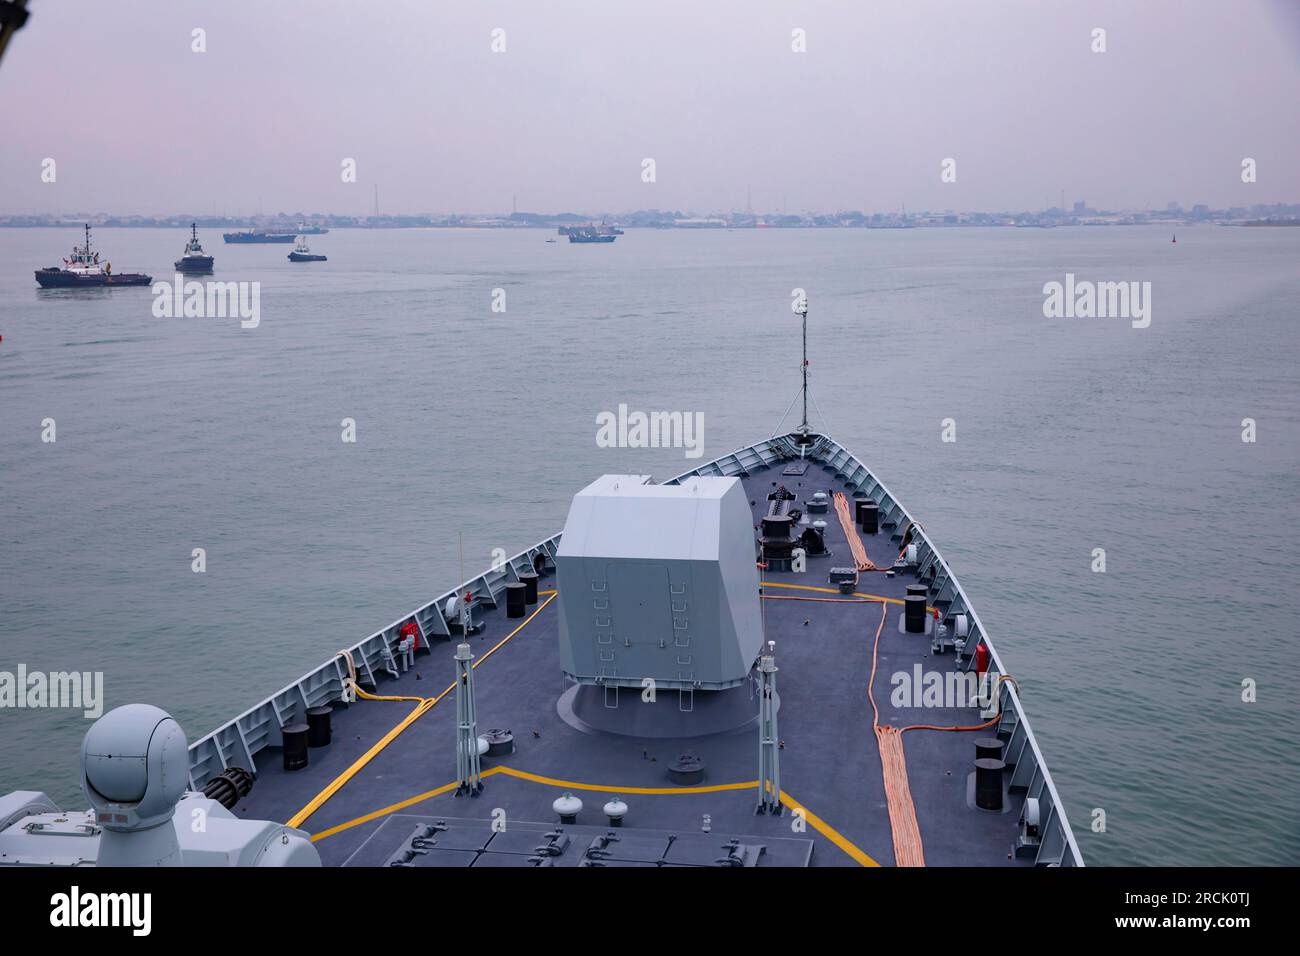 (230715) -- BRAZZAVILLE, July 15, 2023 (Xinhua) -- This photo taken on July 14, 2023 shows a vessel of the Chinese naval fleet approaching the port of Pointe-Noire, economic capital of the Republic of the Congo. The visit of the Chinese naval fleet to the Republic of the Congo showcases friendship and mutual trust between the two countries, with both committed to addressing regional and global security challenges, including the Gulf of Guinea, said Congolese minister of National Defense Charles Richard Mondjo. The Congolese minister made this remark Friday during the arrival ceremony of the Stock Photo